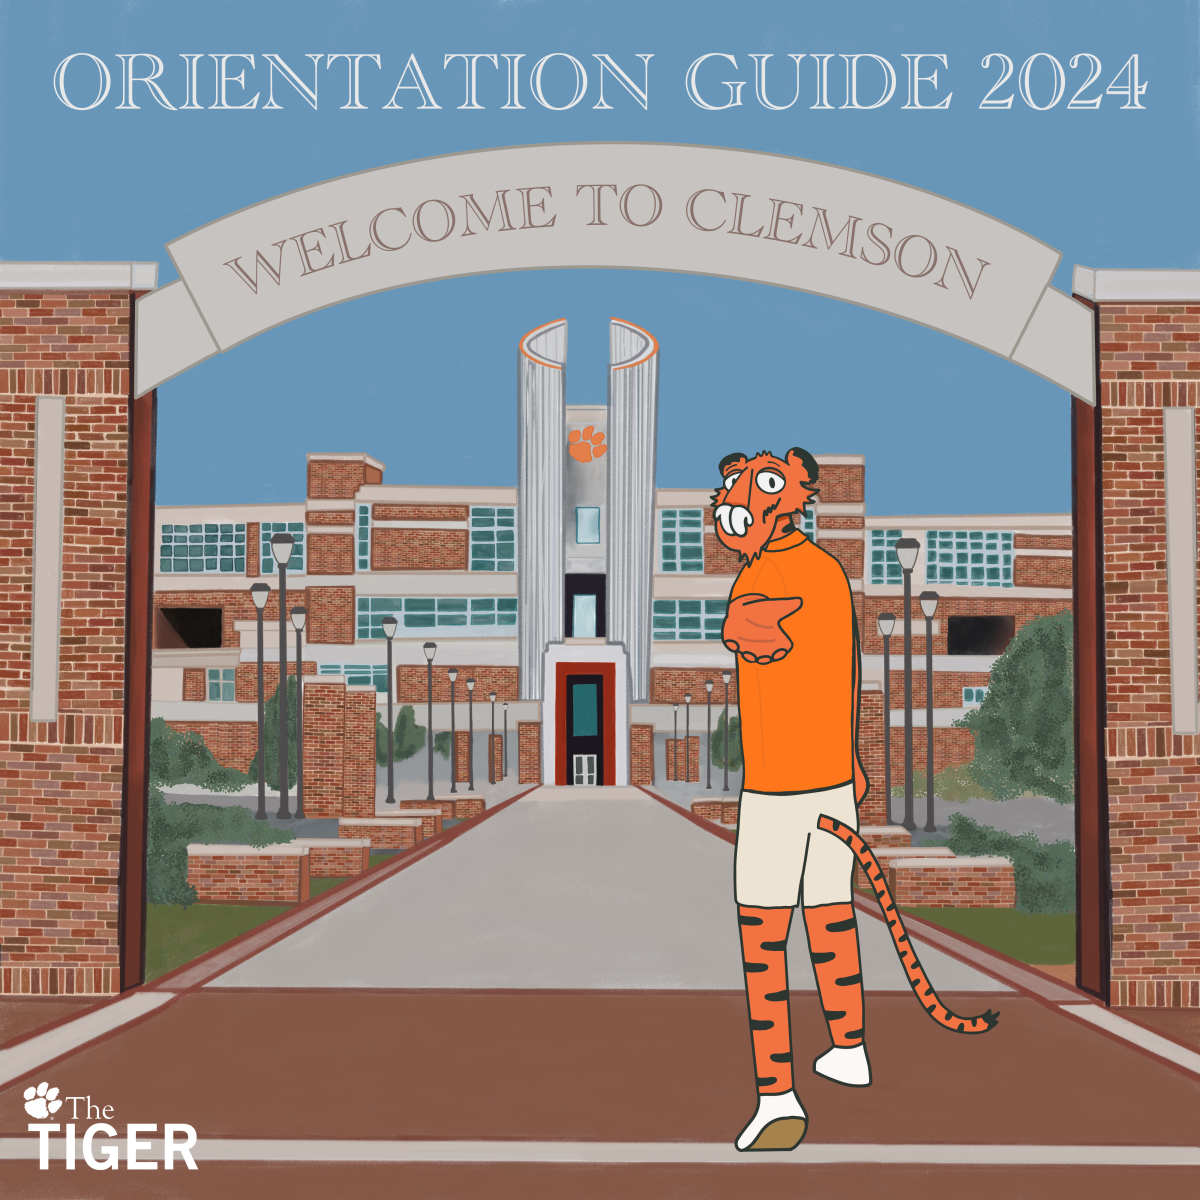 This+years+orientation+guide+serves+as+an+overview+of+the+important+information+all+freshmen+should+know+before+August.